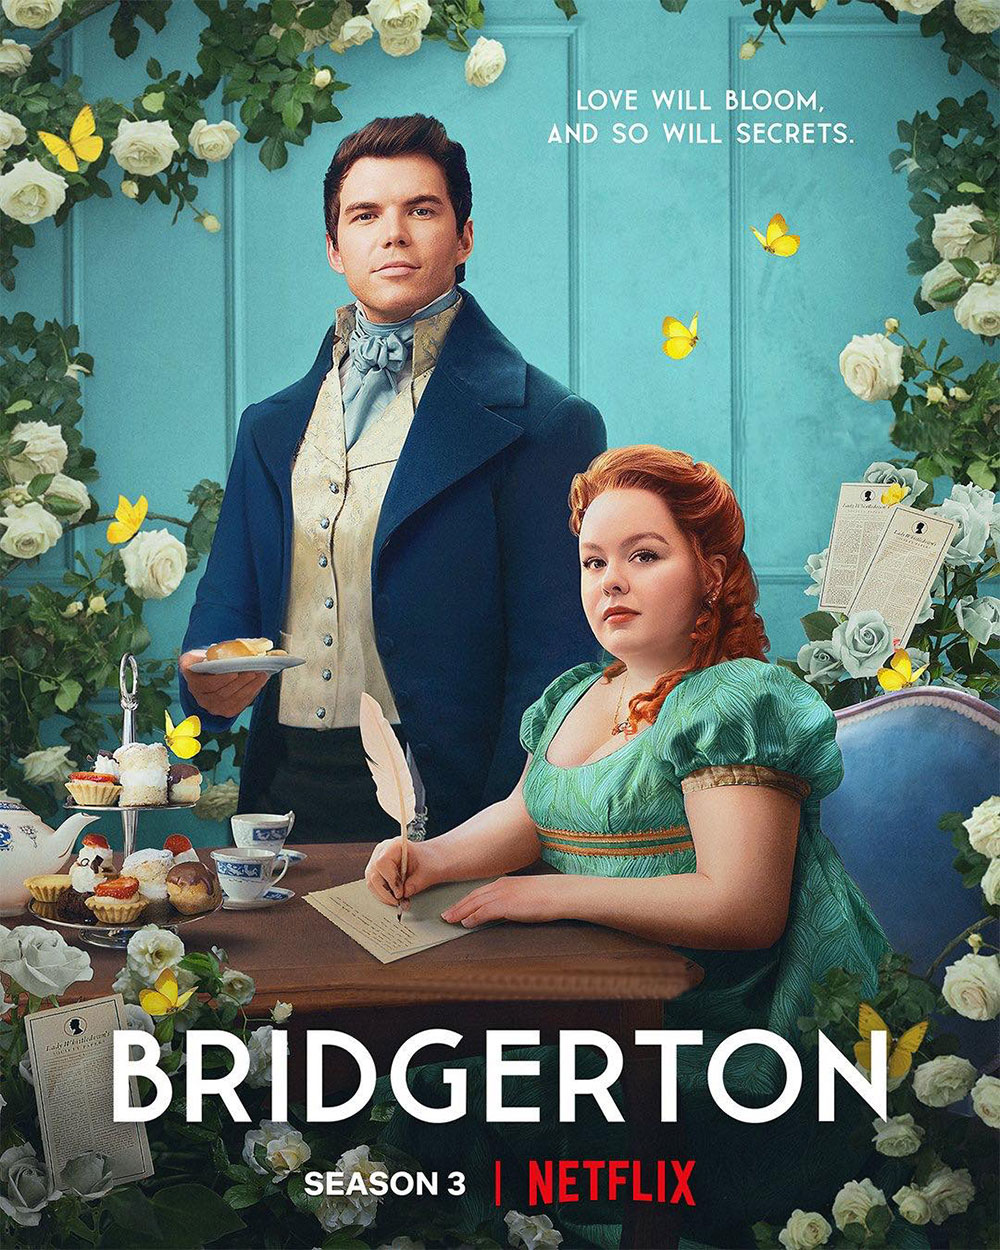 Bridgerton Season 3 Premiere Dates Revealed What to Expect from the